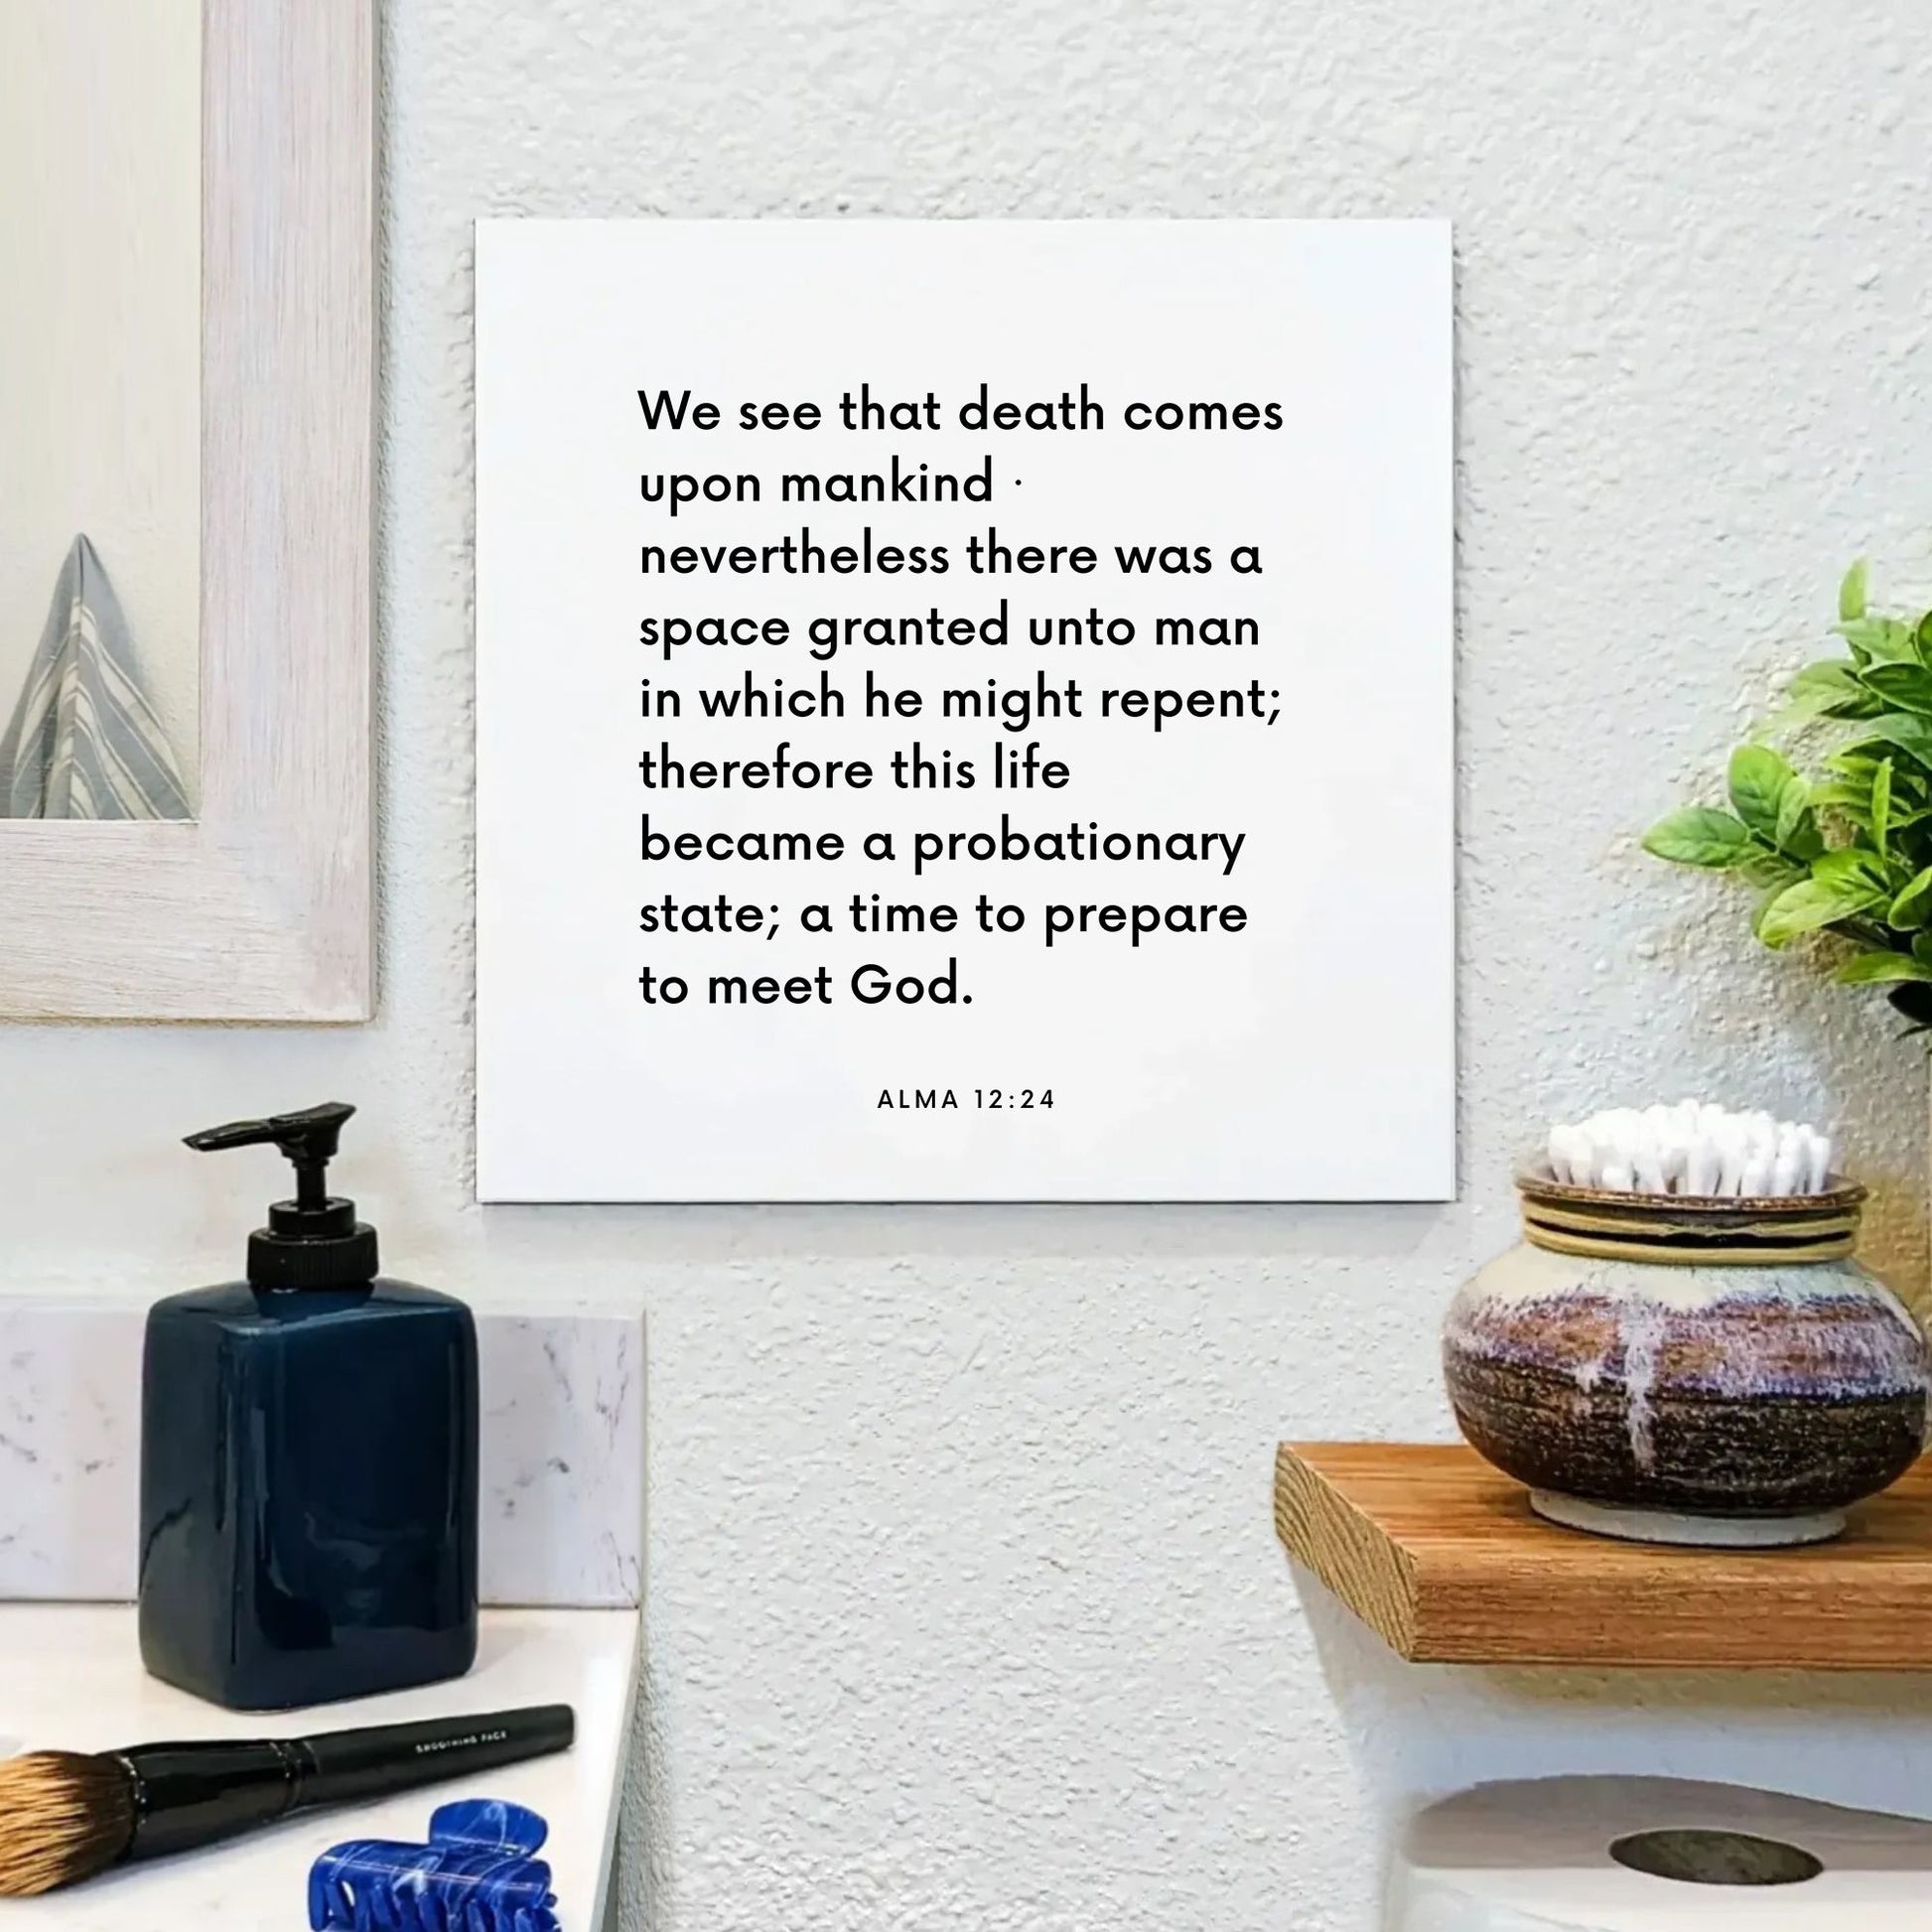 Bathroom mouting of the scripture tile for Alma 12:24 - "This life became a probationary state, to prepare to meet God"